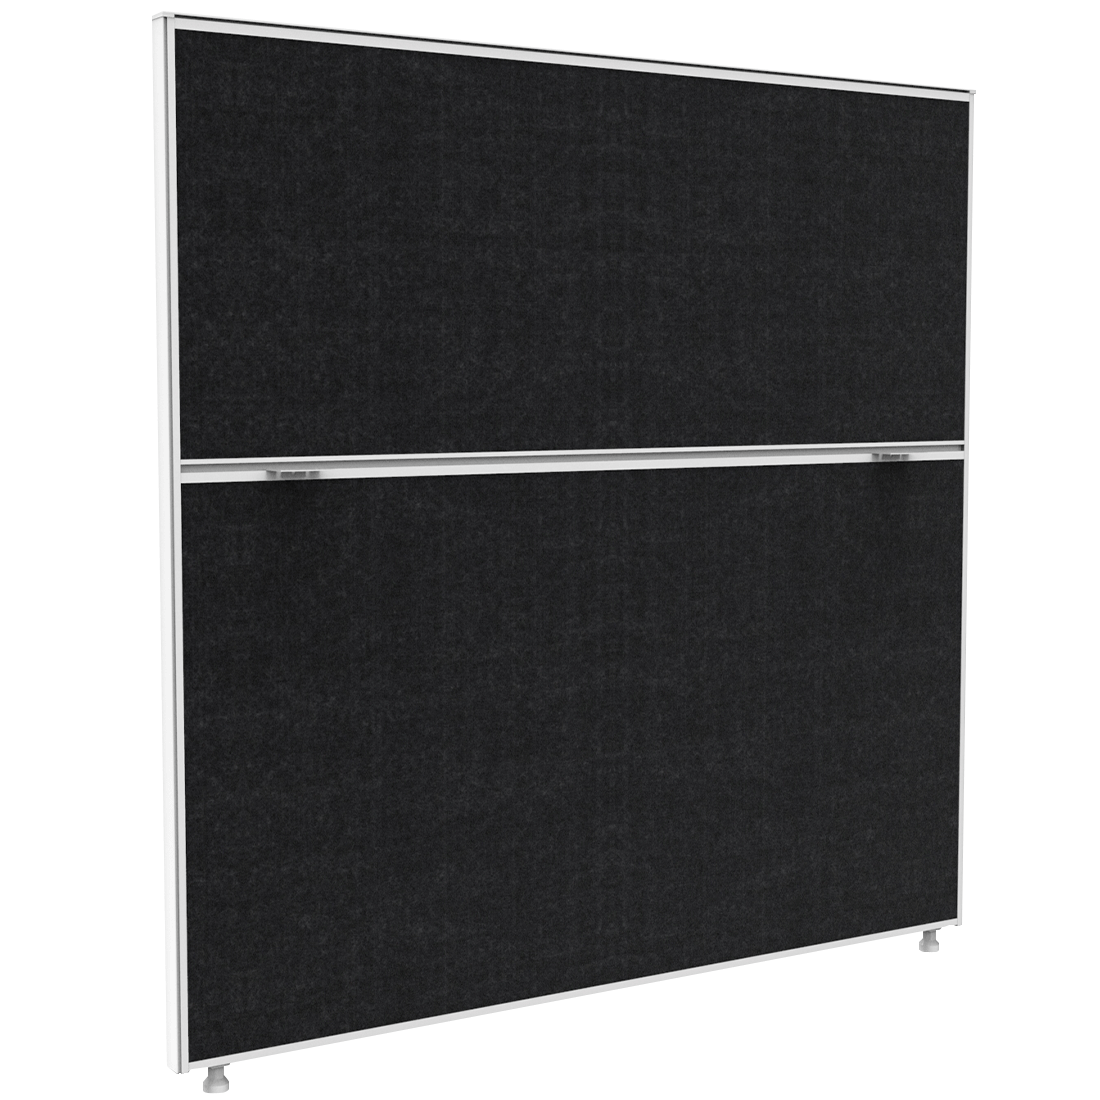 Shush30 Privacy Screen (1200mm Height) - switchoffice.com.au